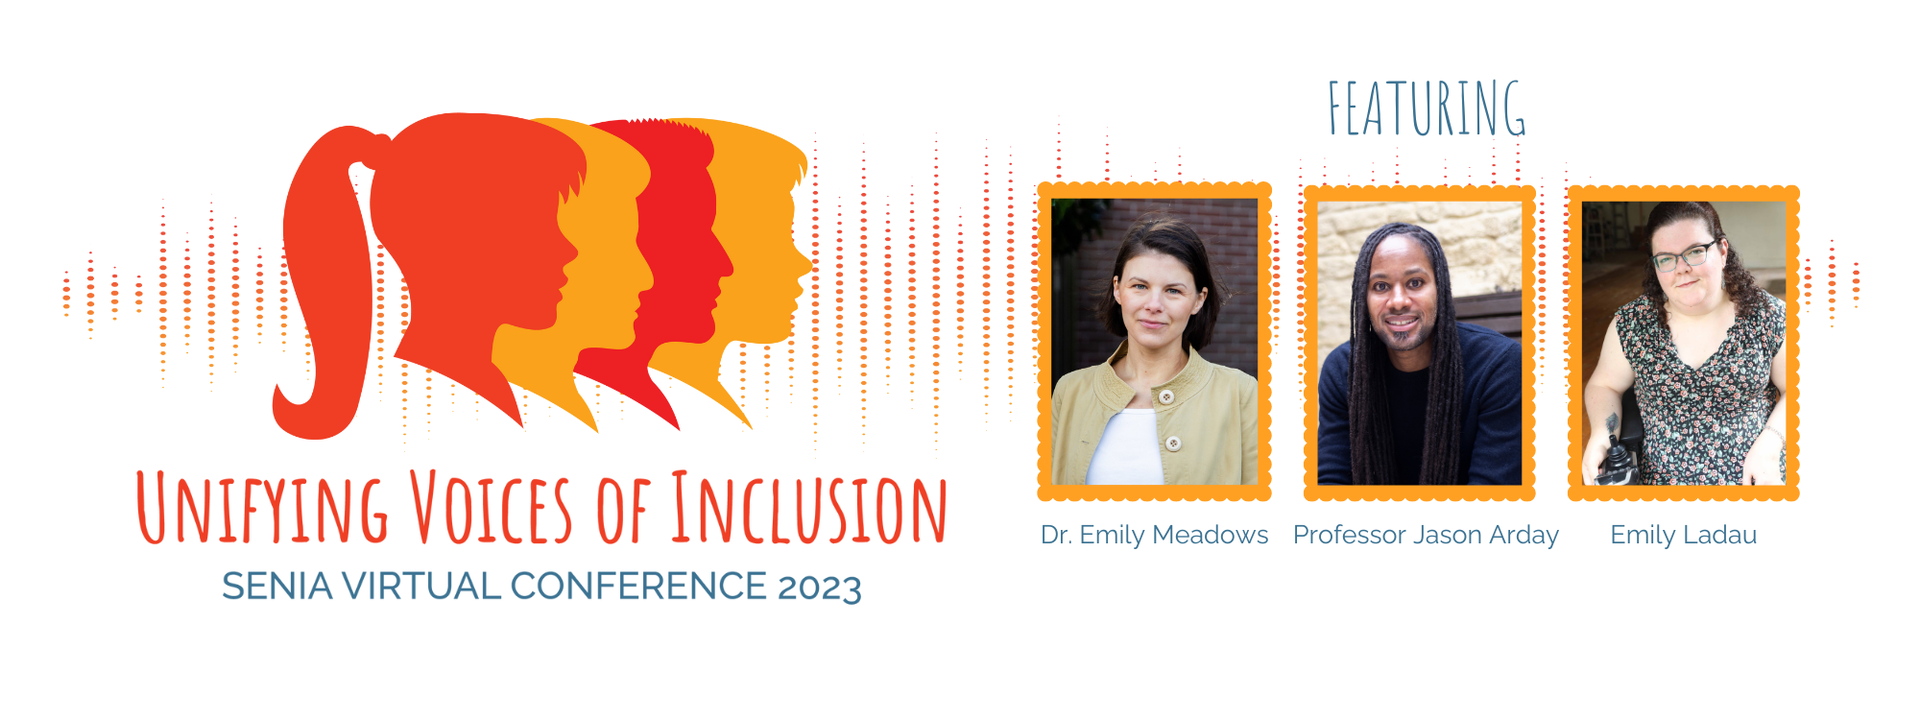 Poster for Unifying Voices of Inclusion Conference with images of the three keynote speakers: Dr. Emily Meadows, Professor Jason Arday, and Emily Ladau